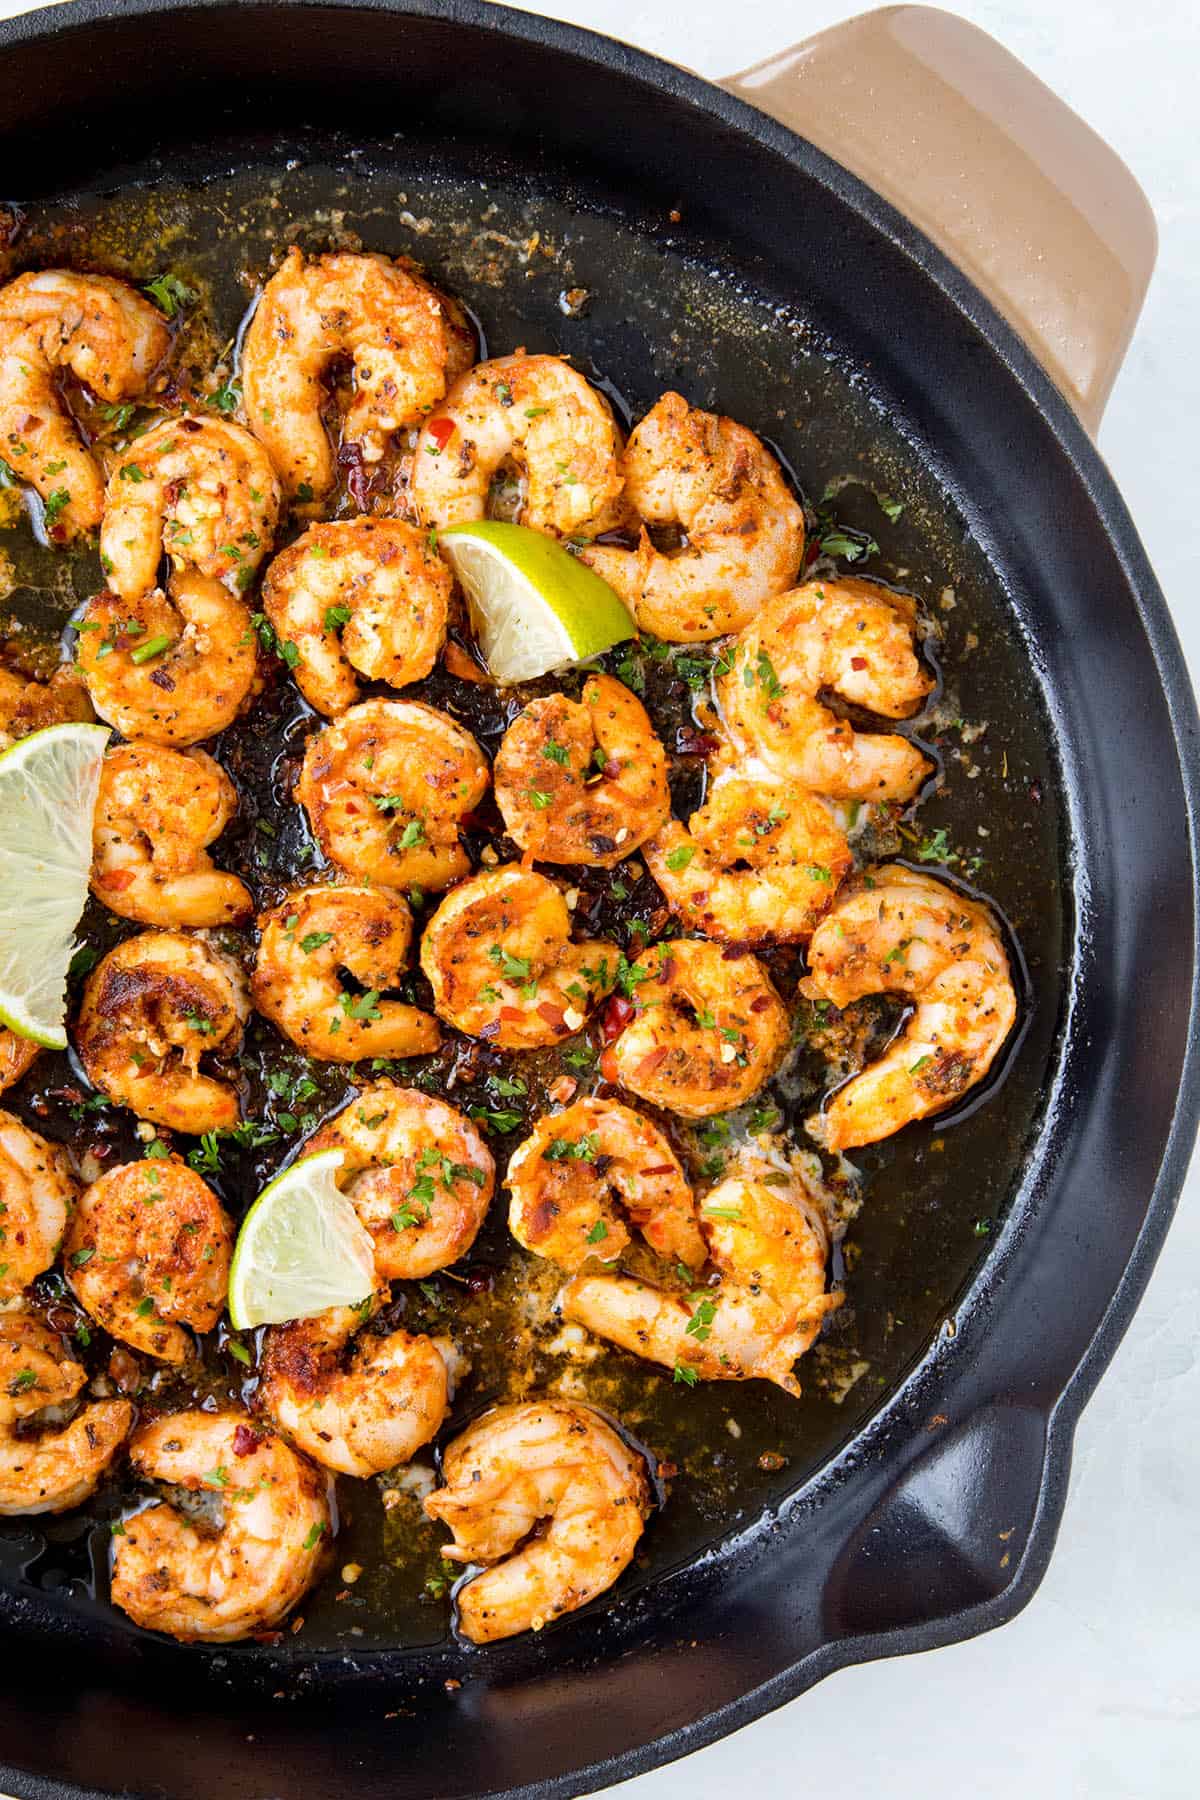 Blackened Shrimp in a pan, ready to eat